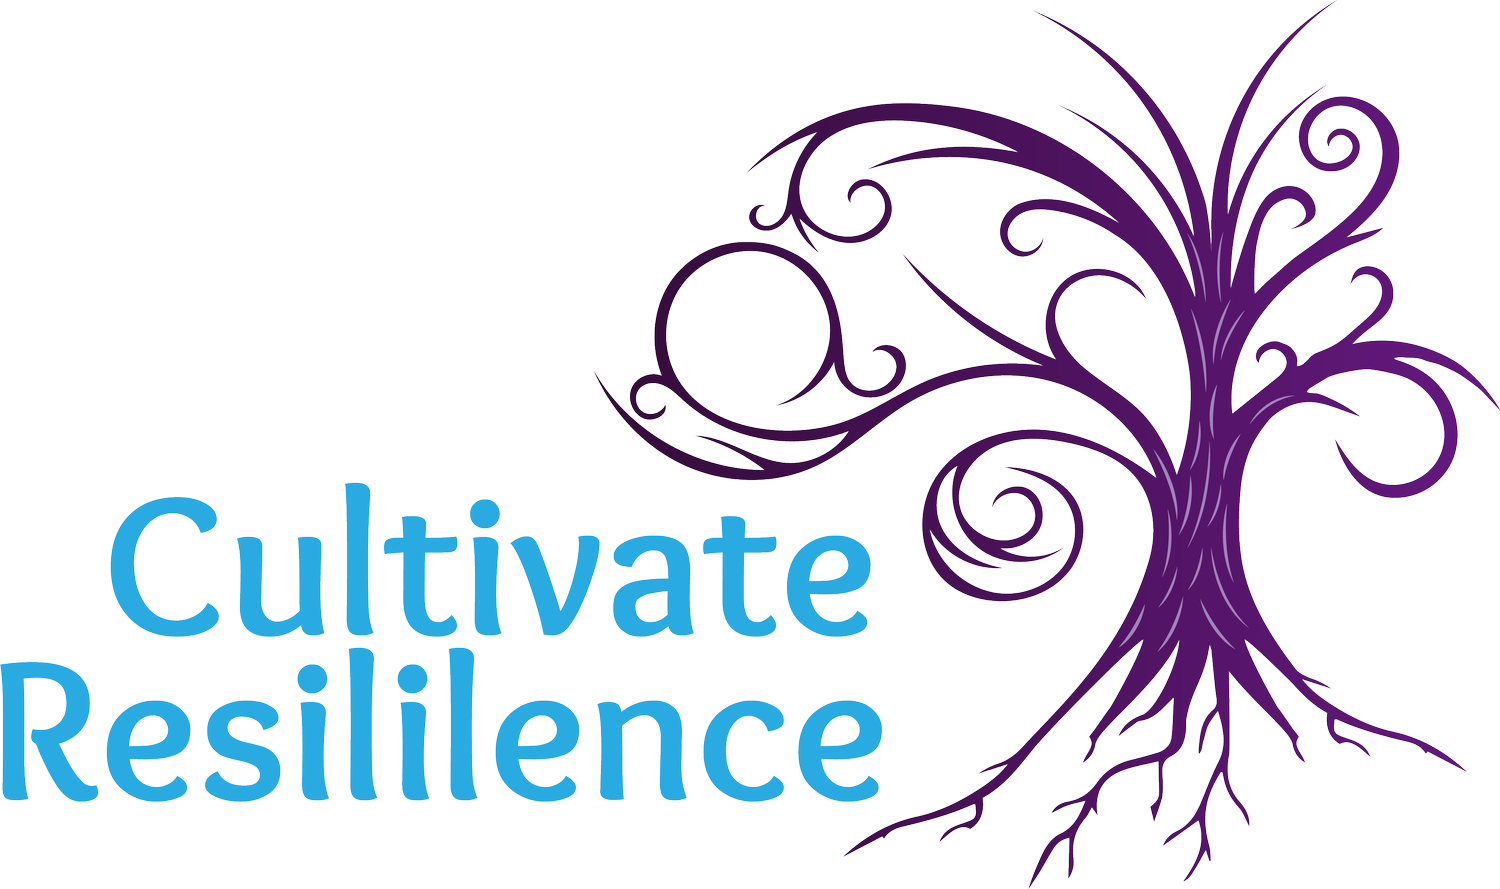 Cultivate Resilience